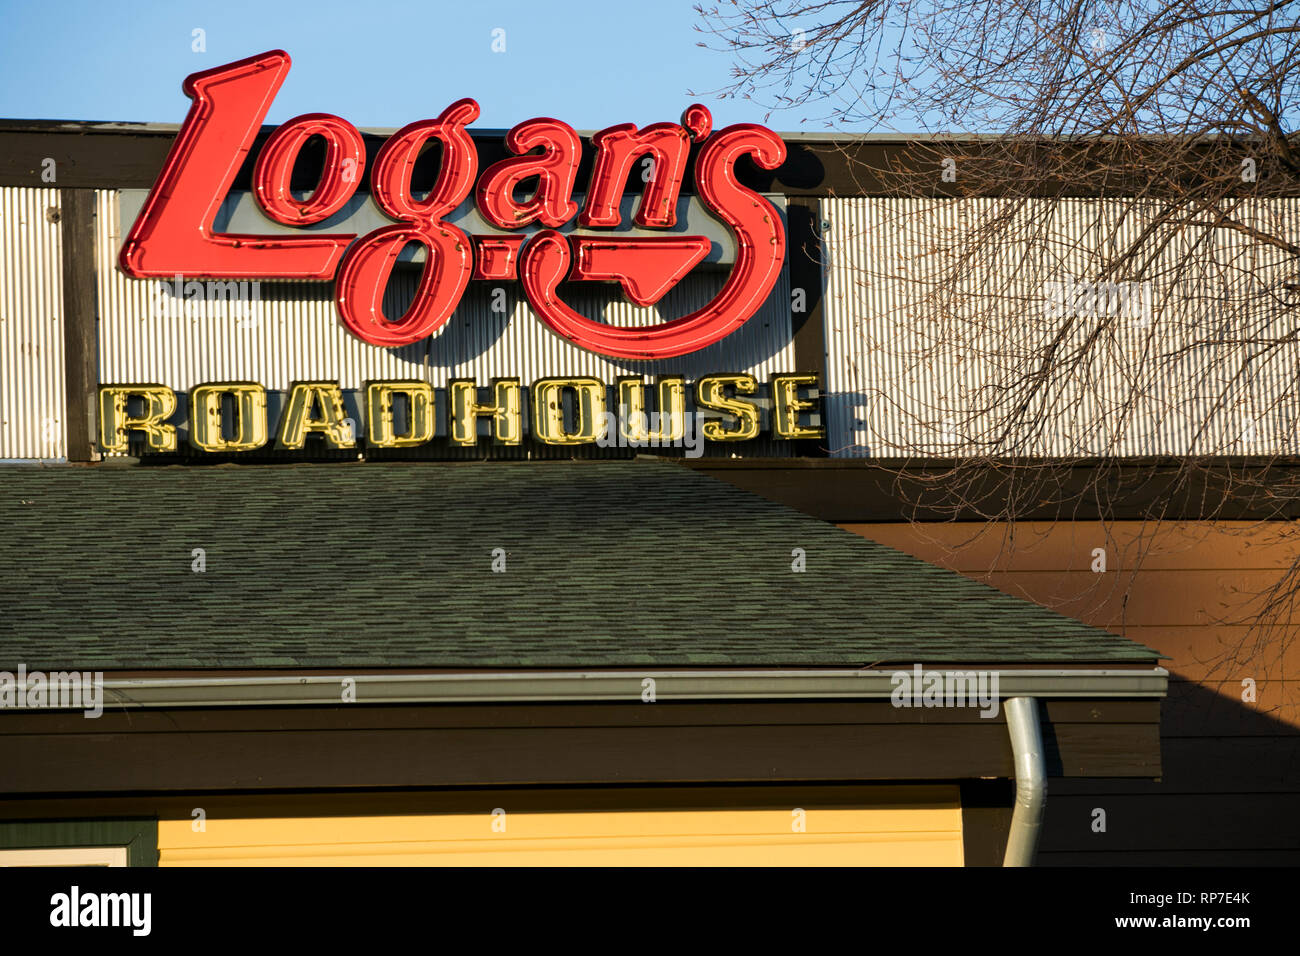 A logo sign outside of a Logan's Roadhouse restaurant location in Fredericksburg, Virginia on February 19, 2019. Stock Photo